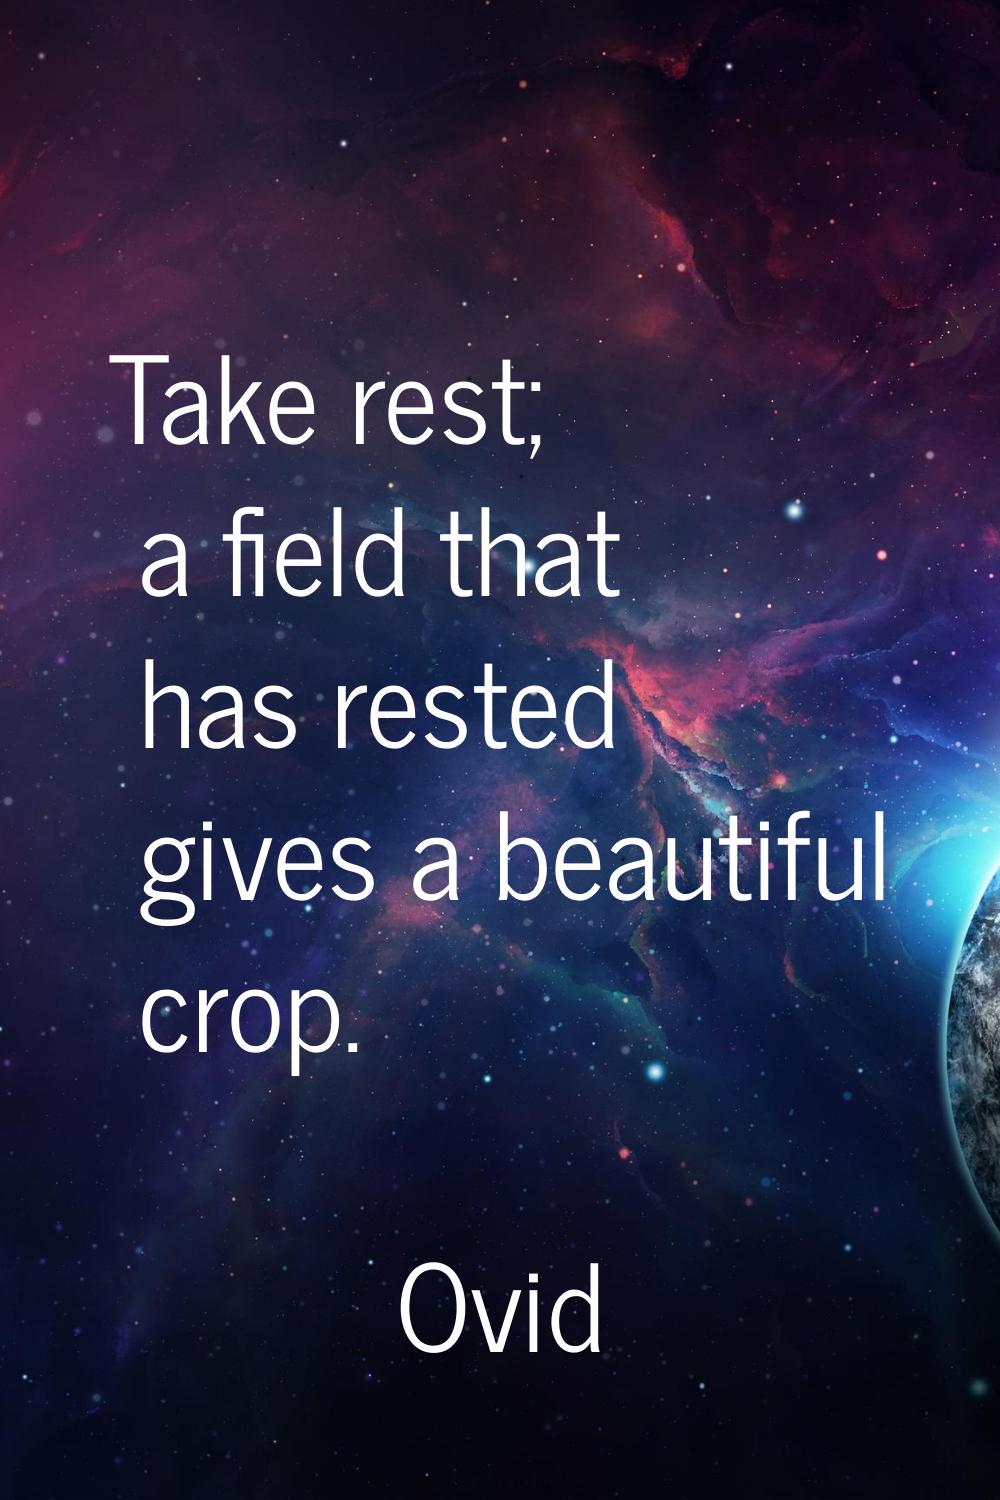 Take rest; a field that has rested gives a beautiful crop.